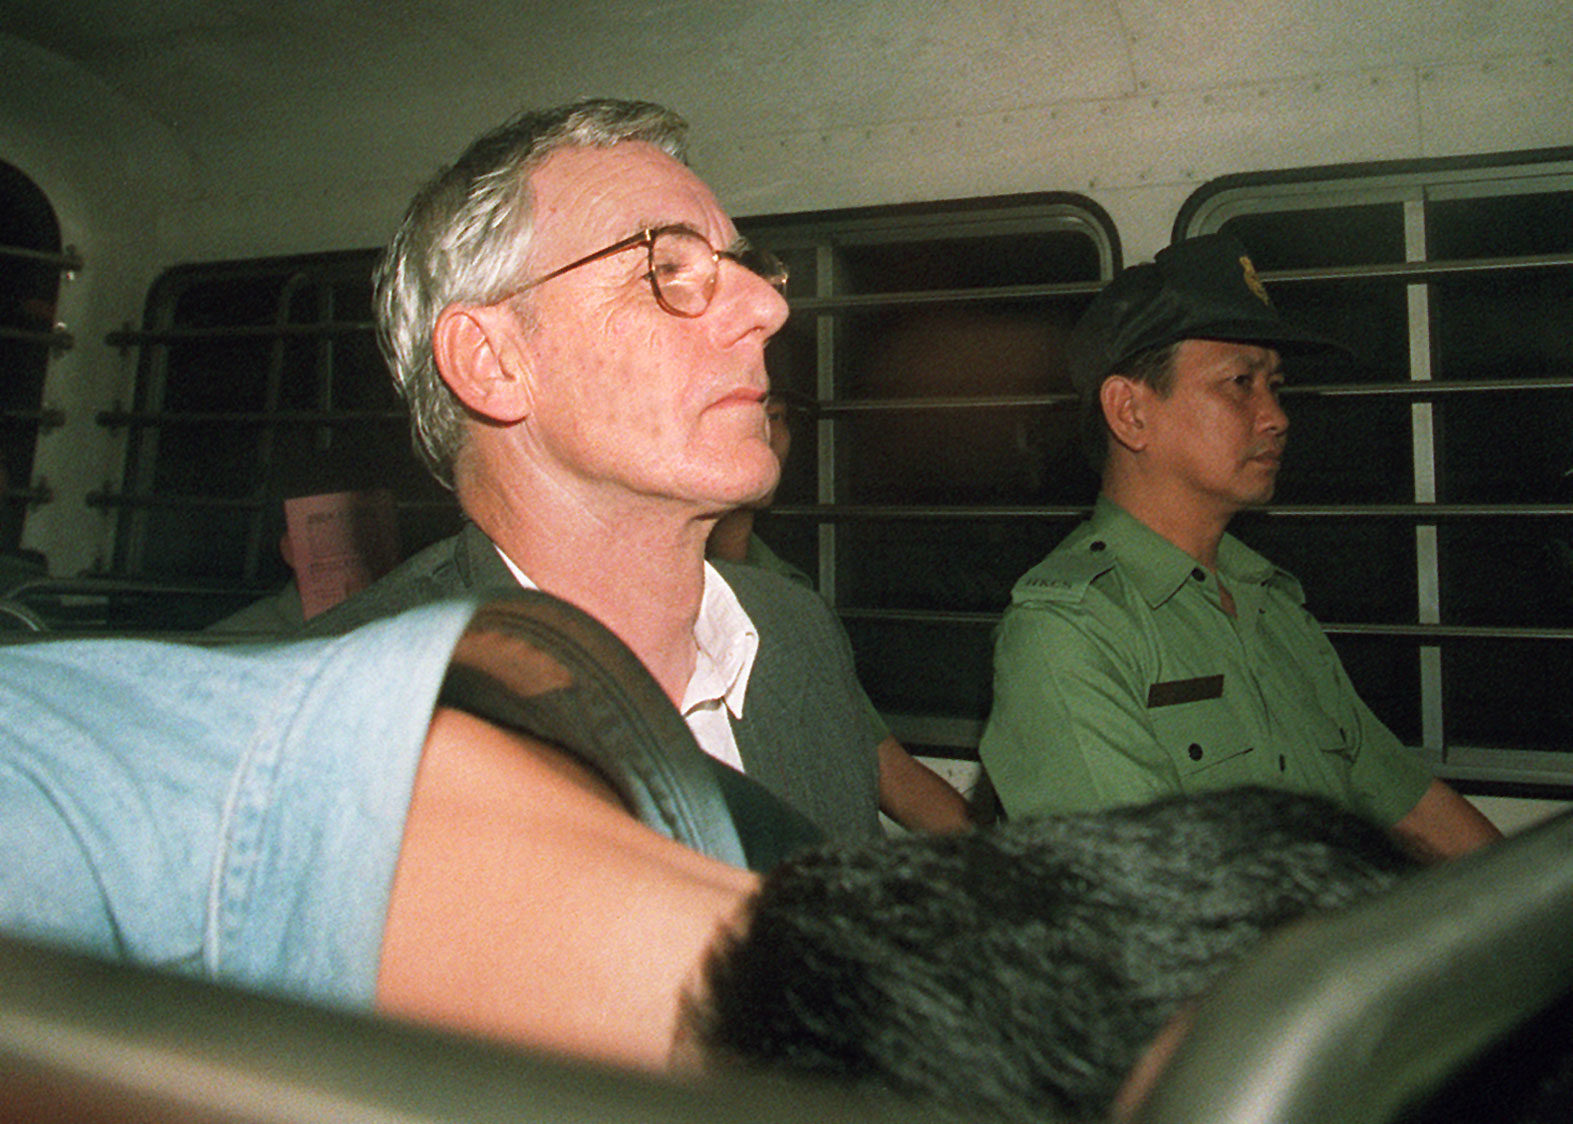 Clive Holgate leaves court in Wan Chai, Hong Kong, in 1995. Accused of living beyond his salary and of taking bribes, the civil servant claimed some of his unexplained money had been left behind when his wife – a heavy gambler who had a secret lover – disappeared. Photo: SCMP